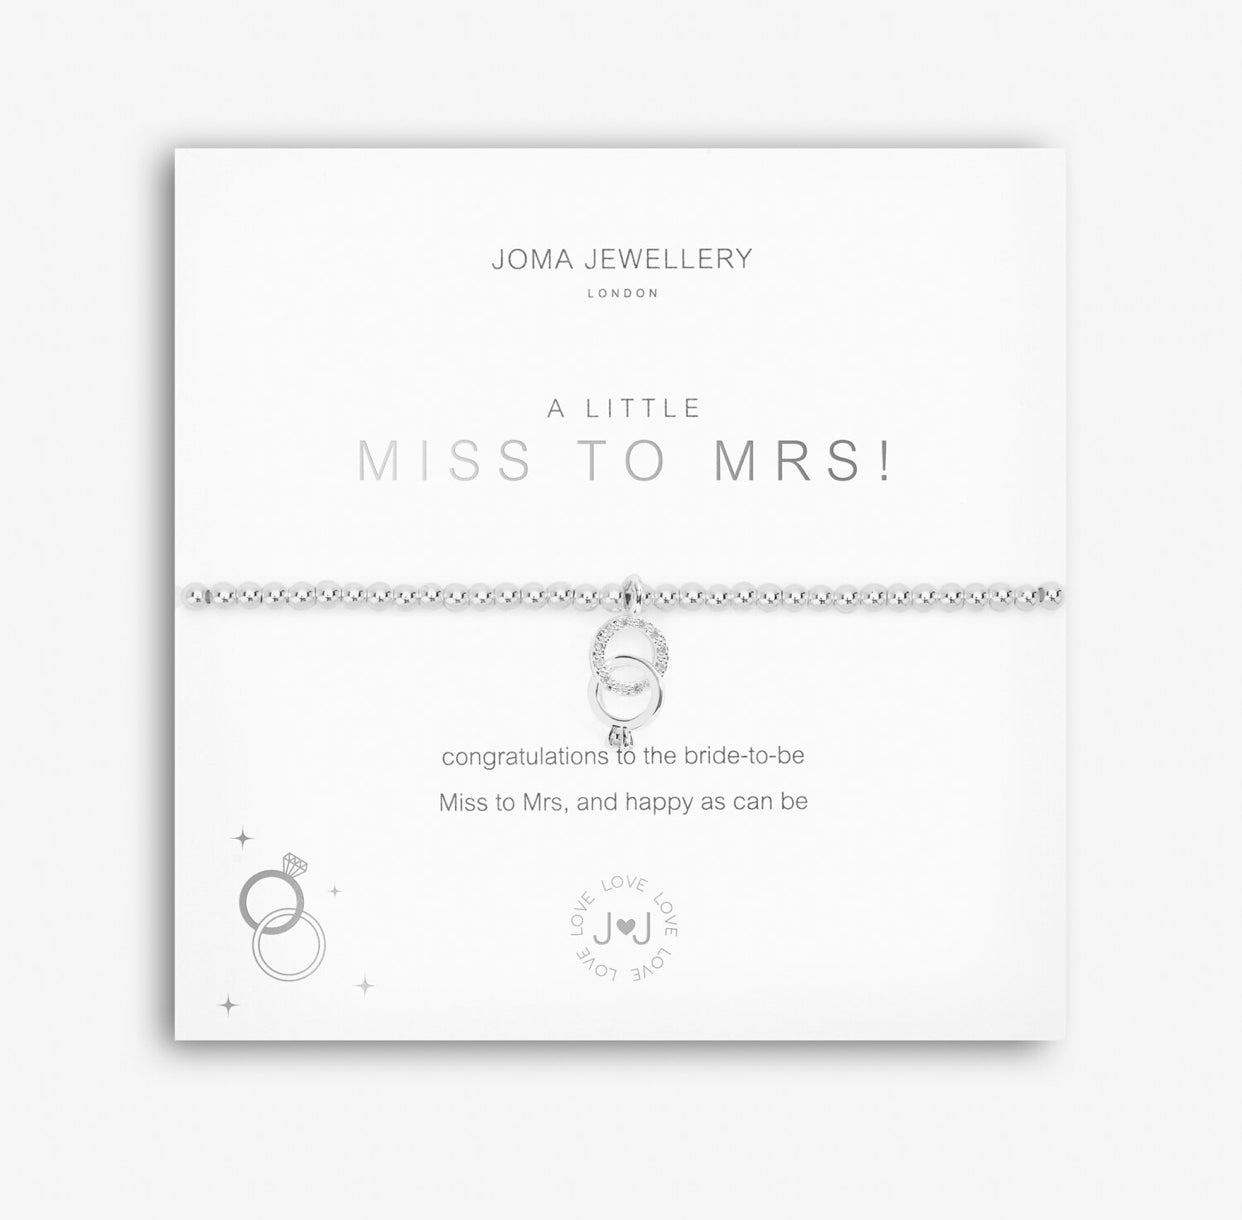 Joma Jewellery 'A Little' Miss to Mrs